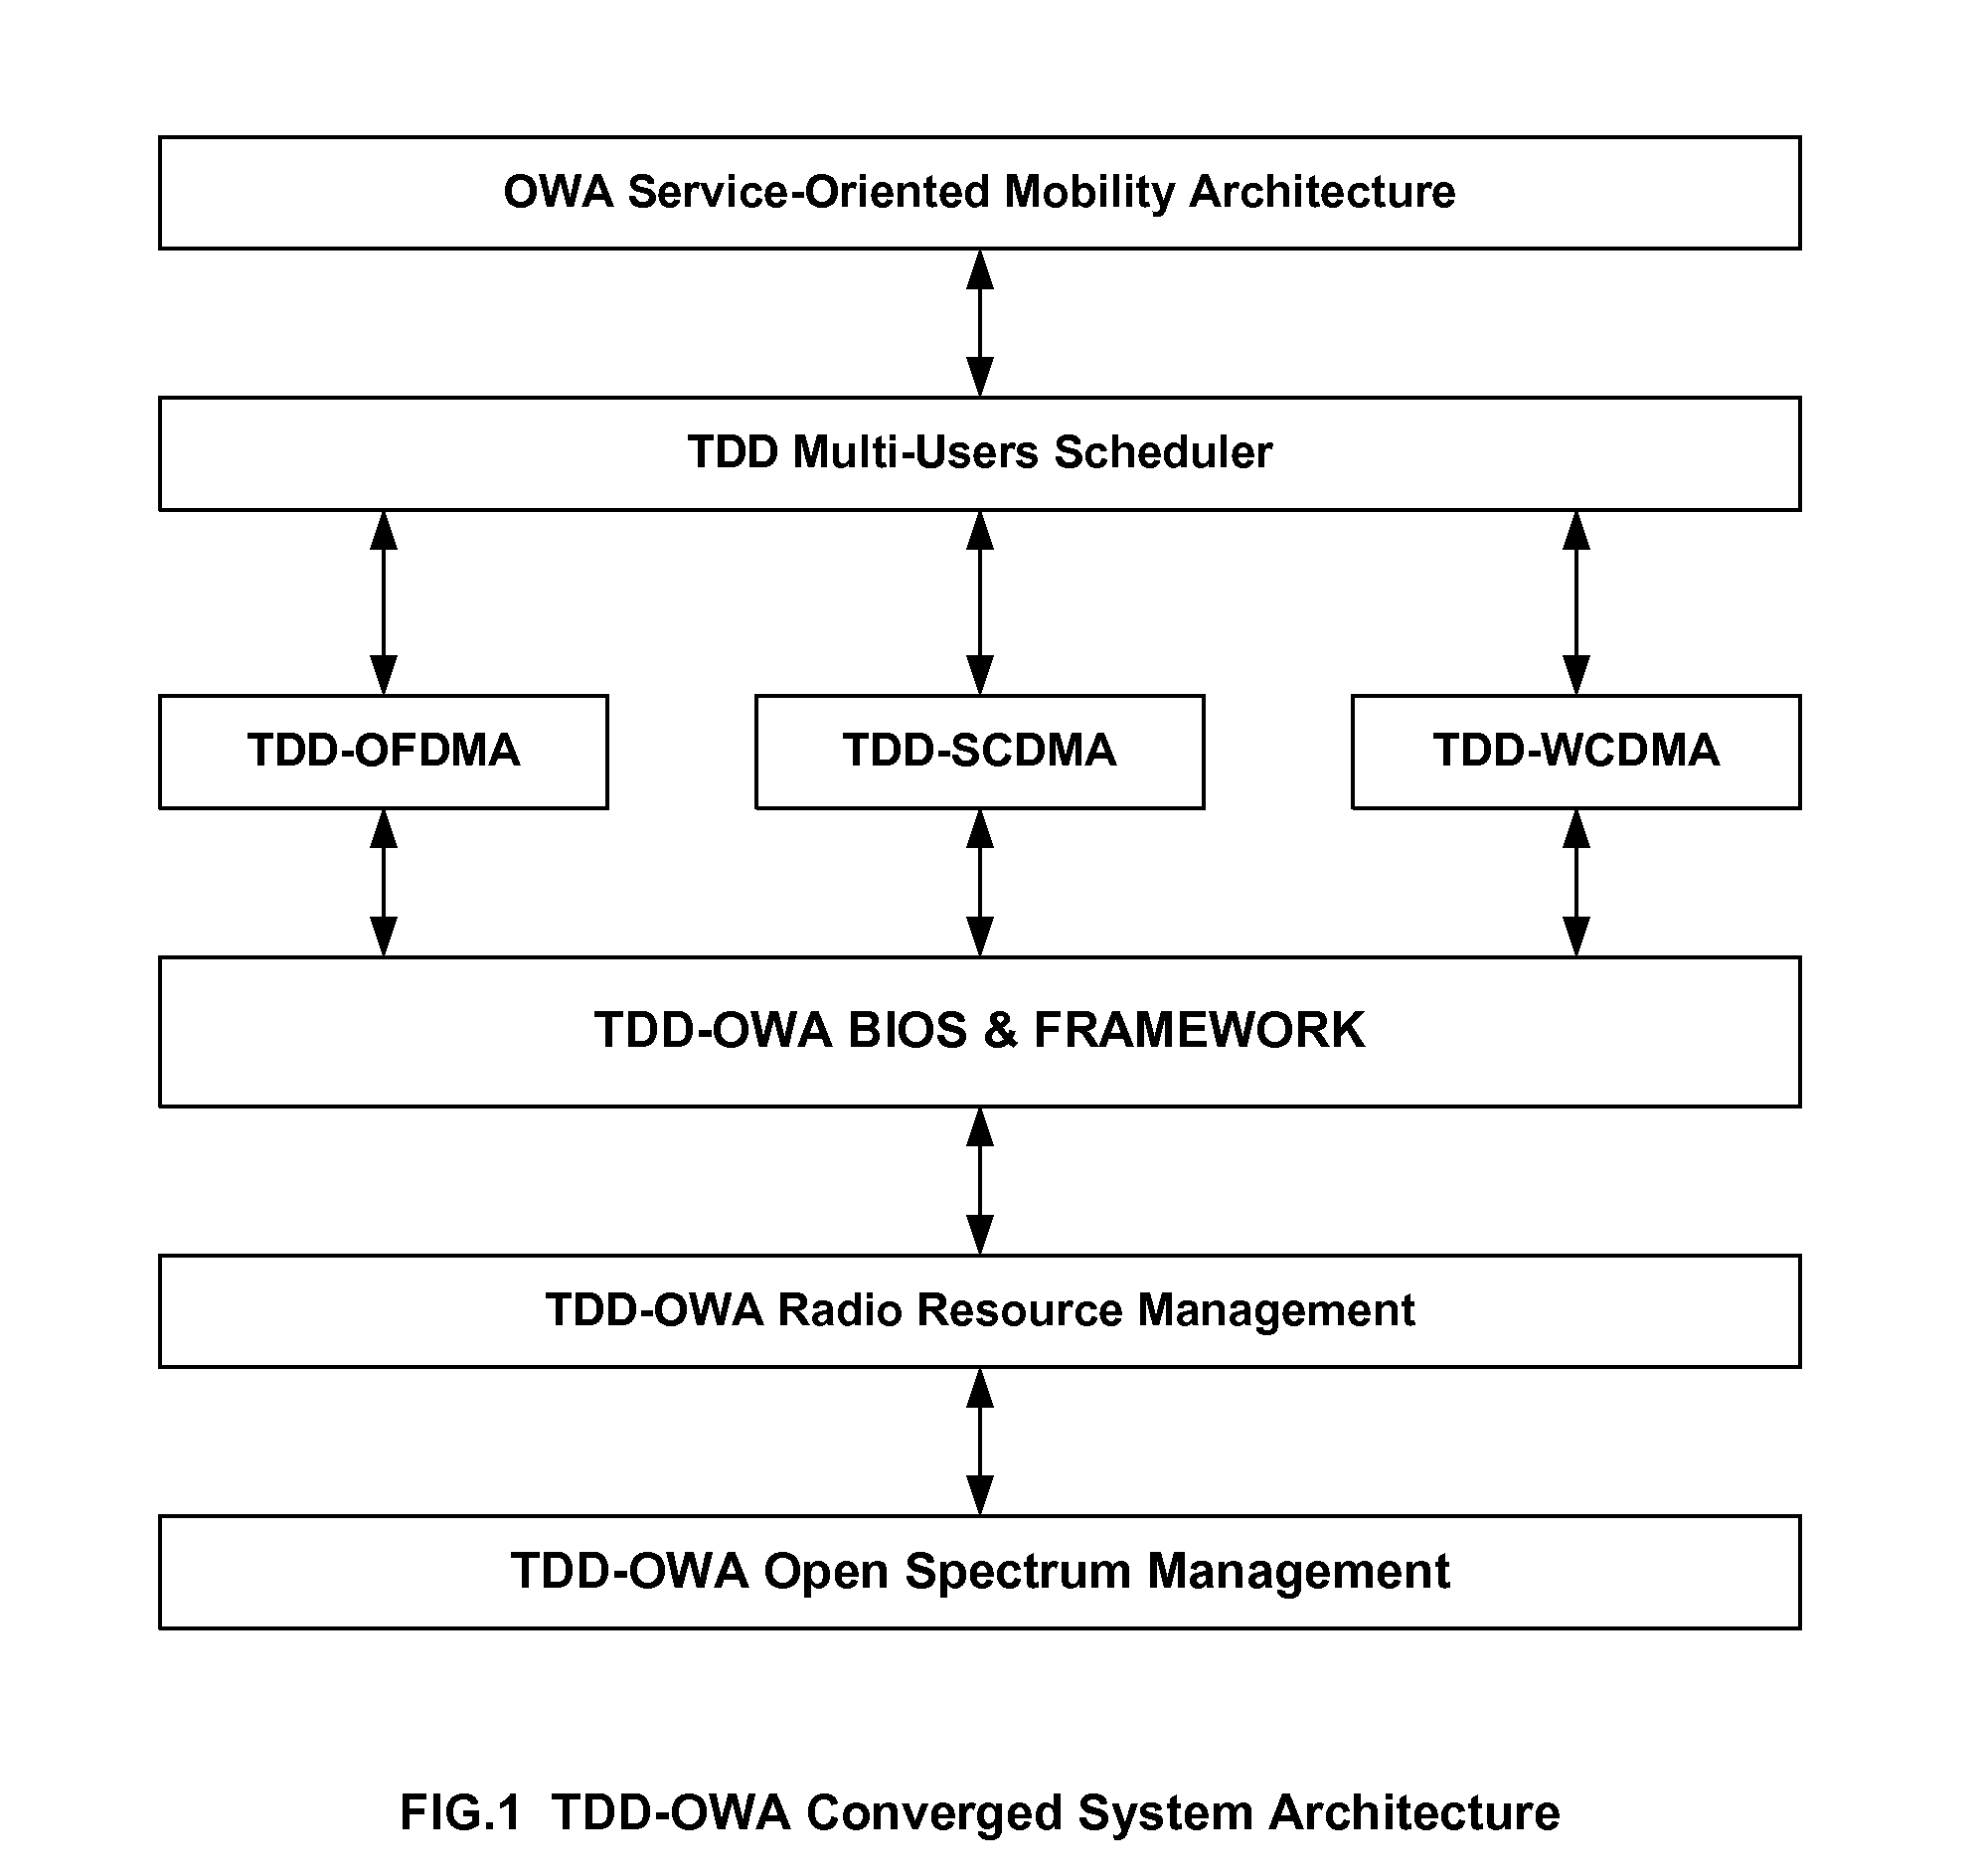 Architecture for owa based tdd-ofdm system